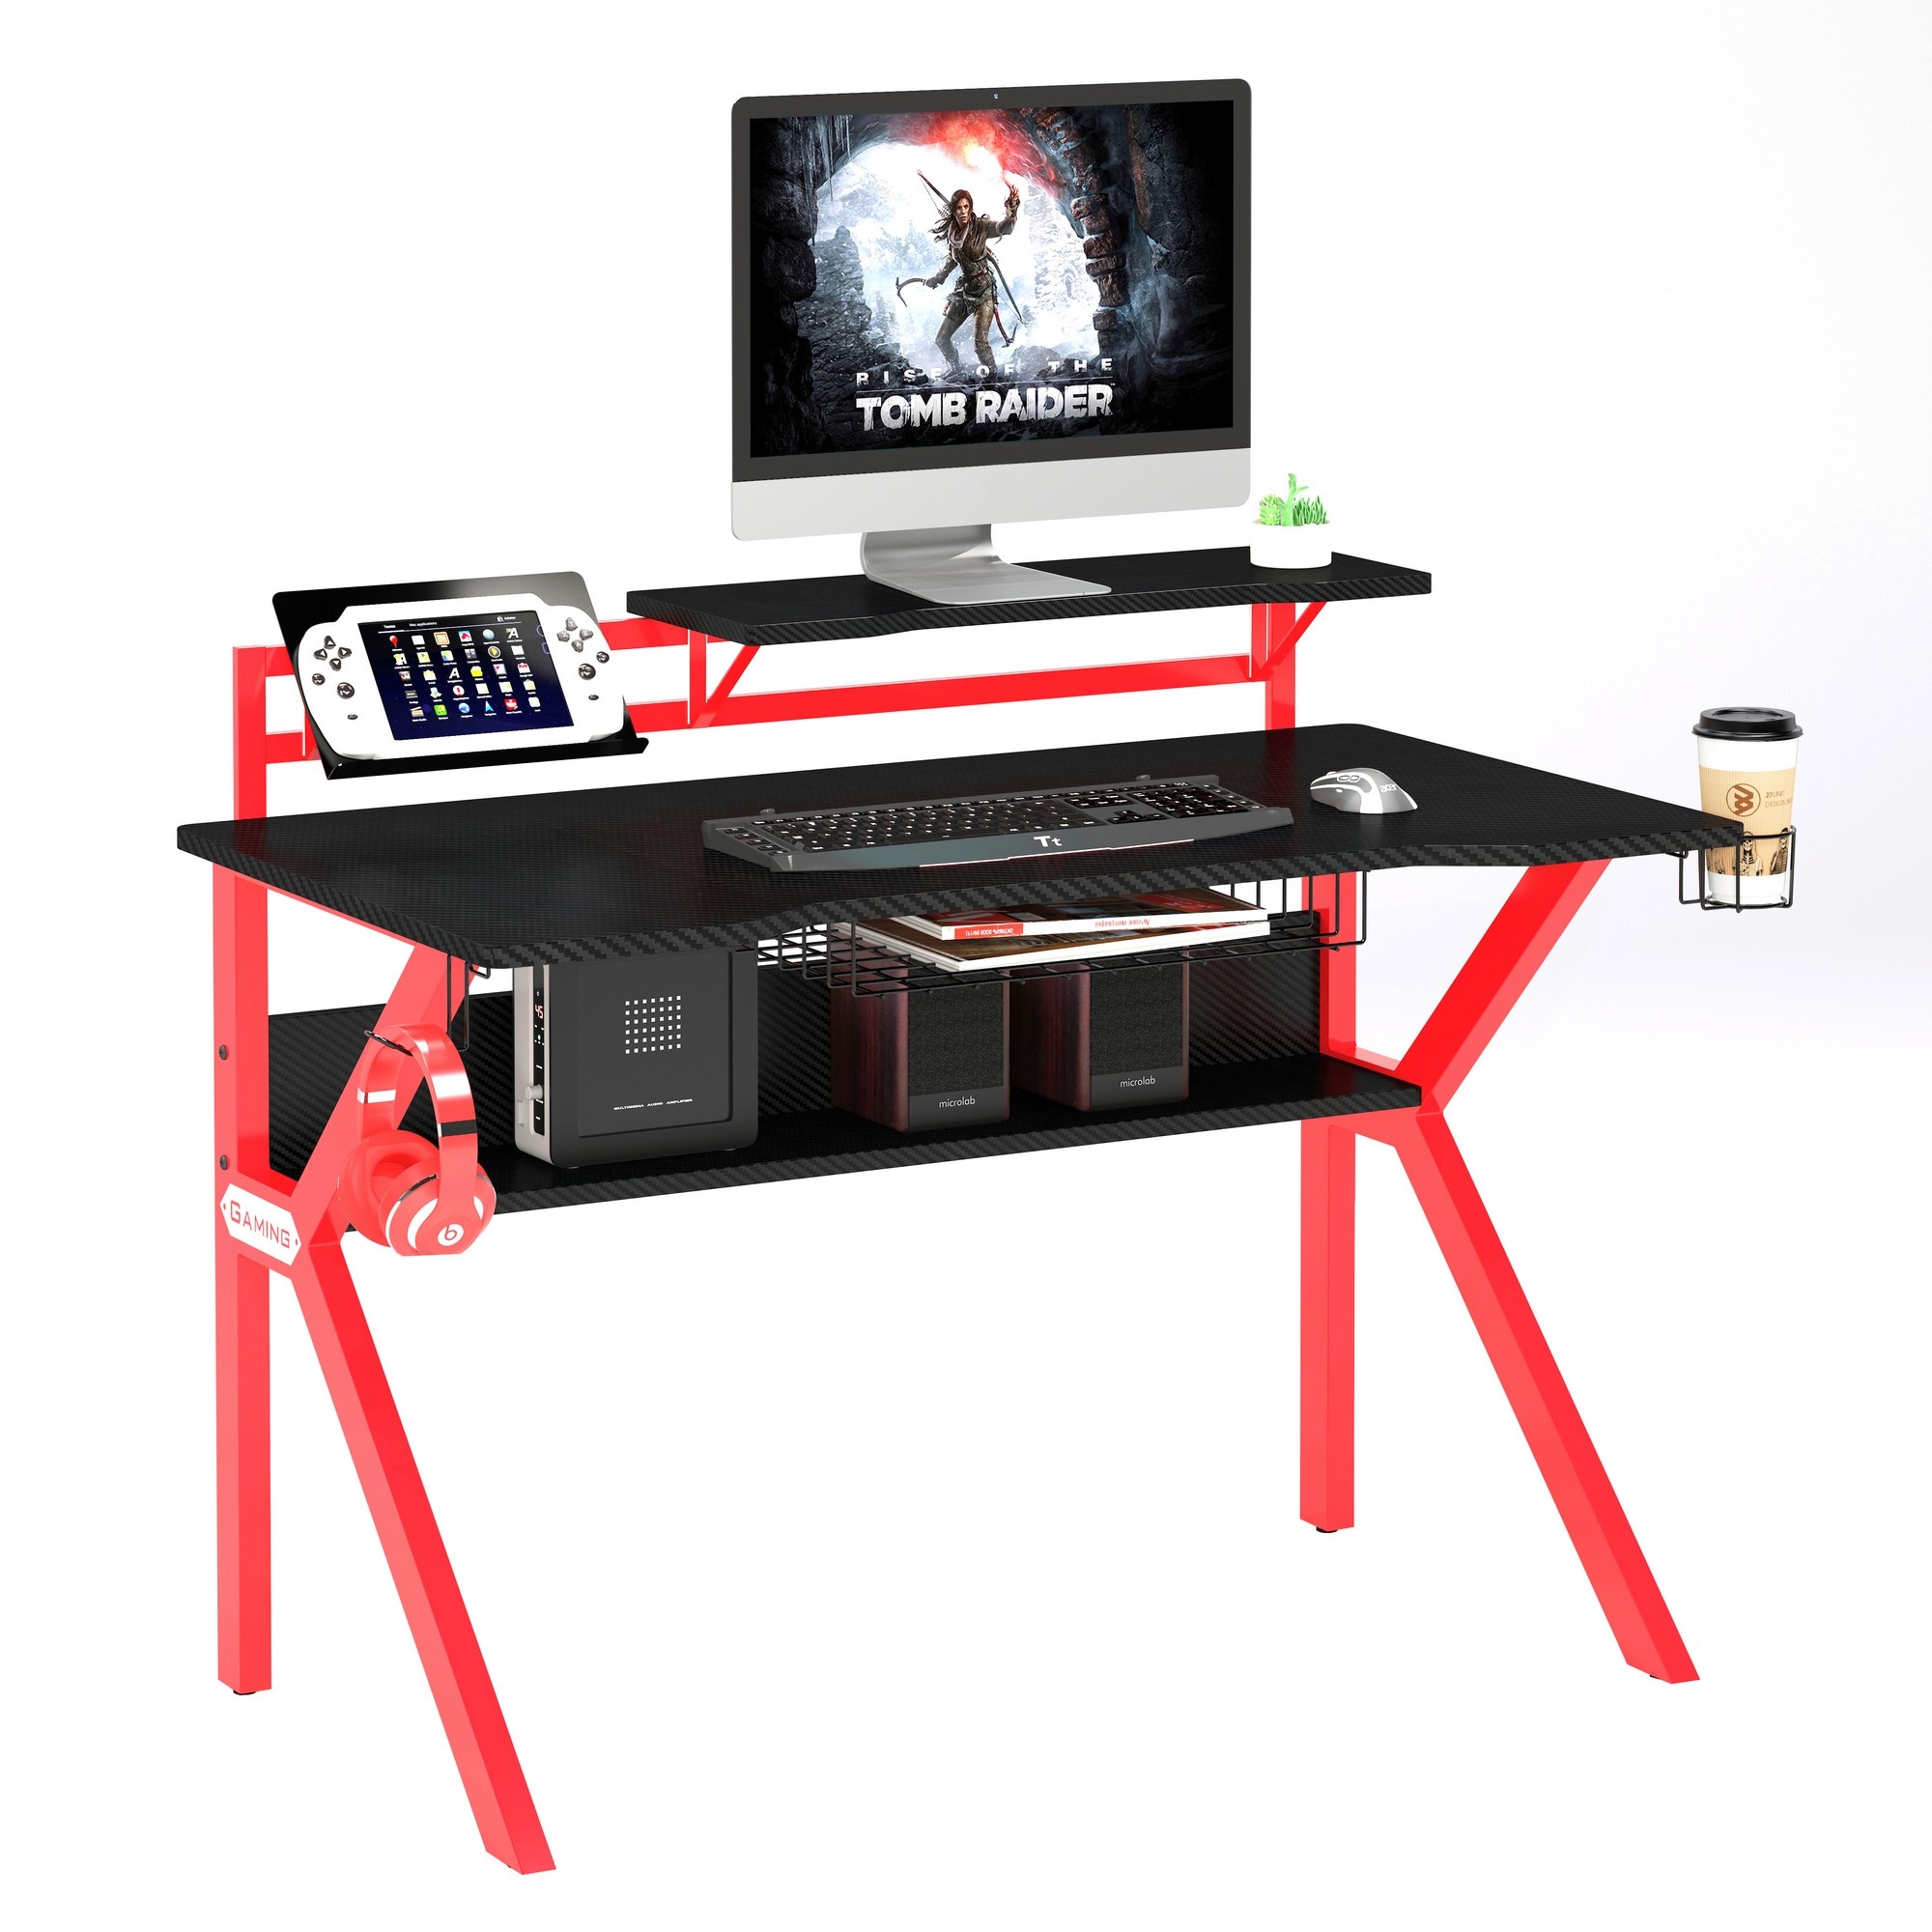 Gaming table PLAY black and red Color 136x86x56 cm. Gaming table